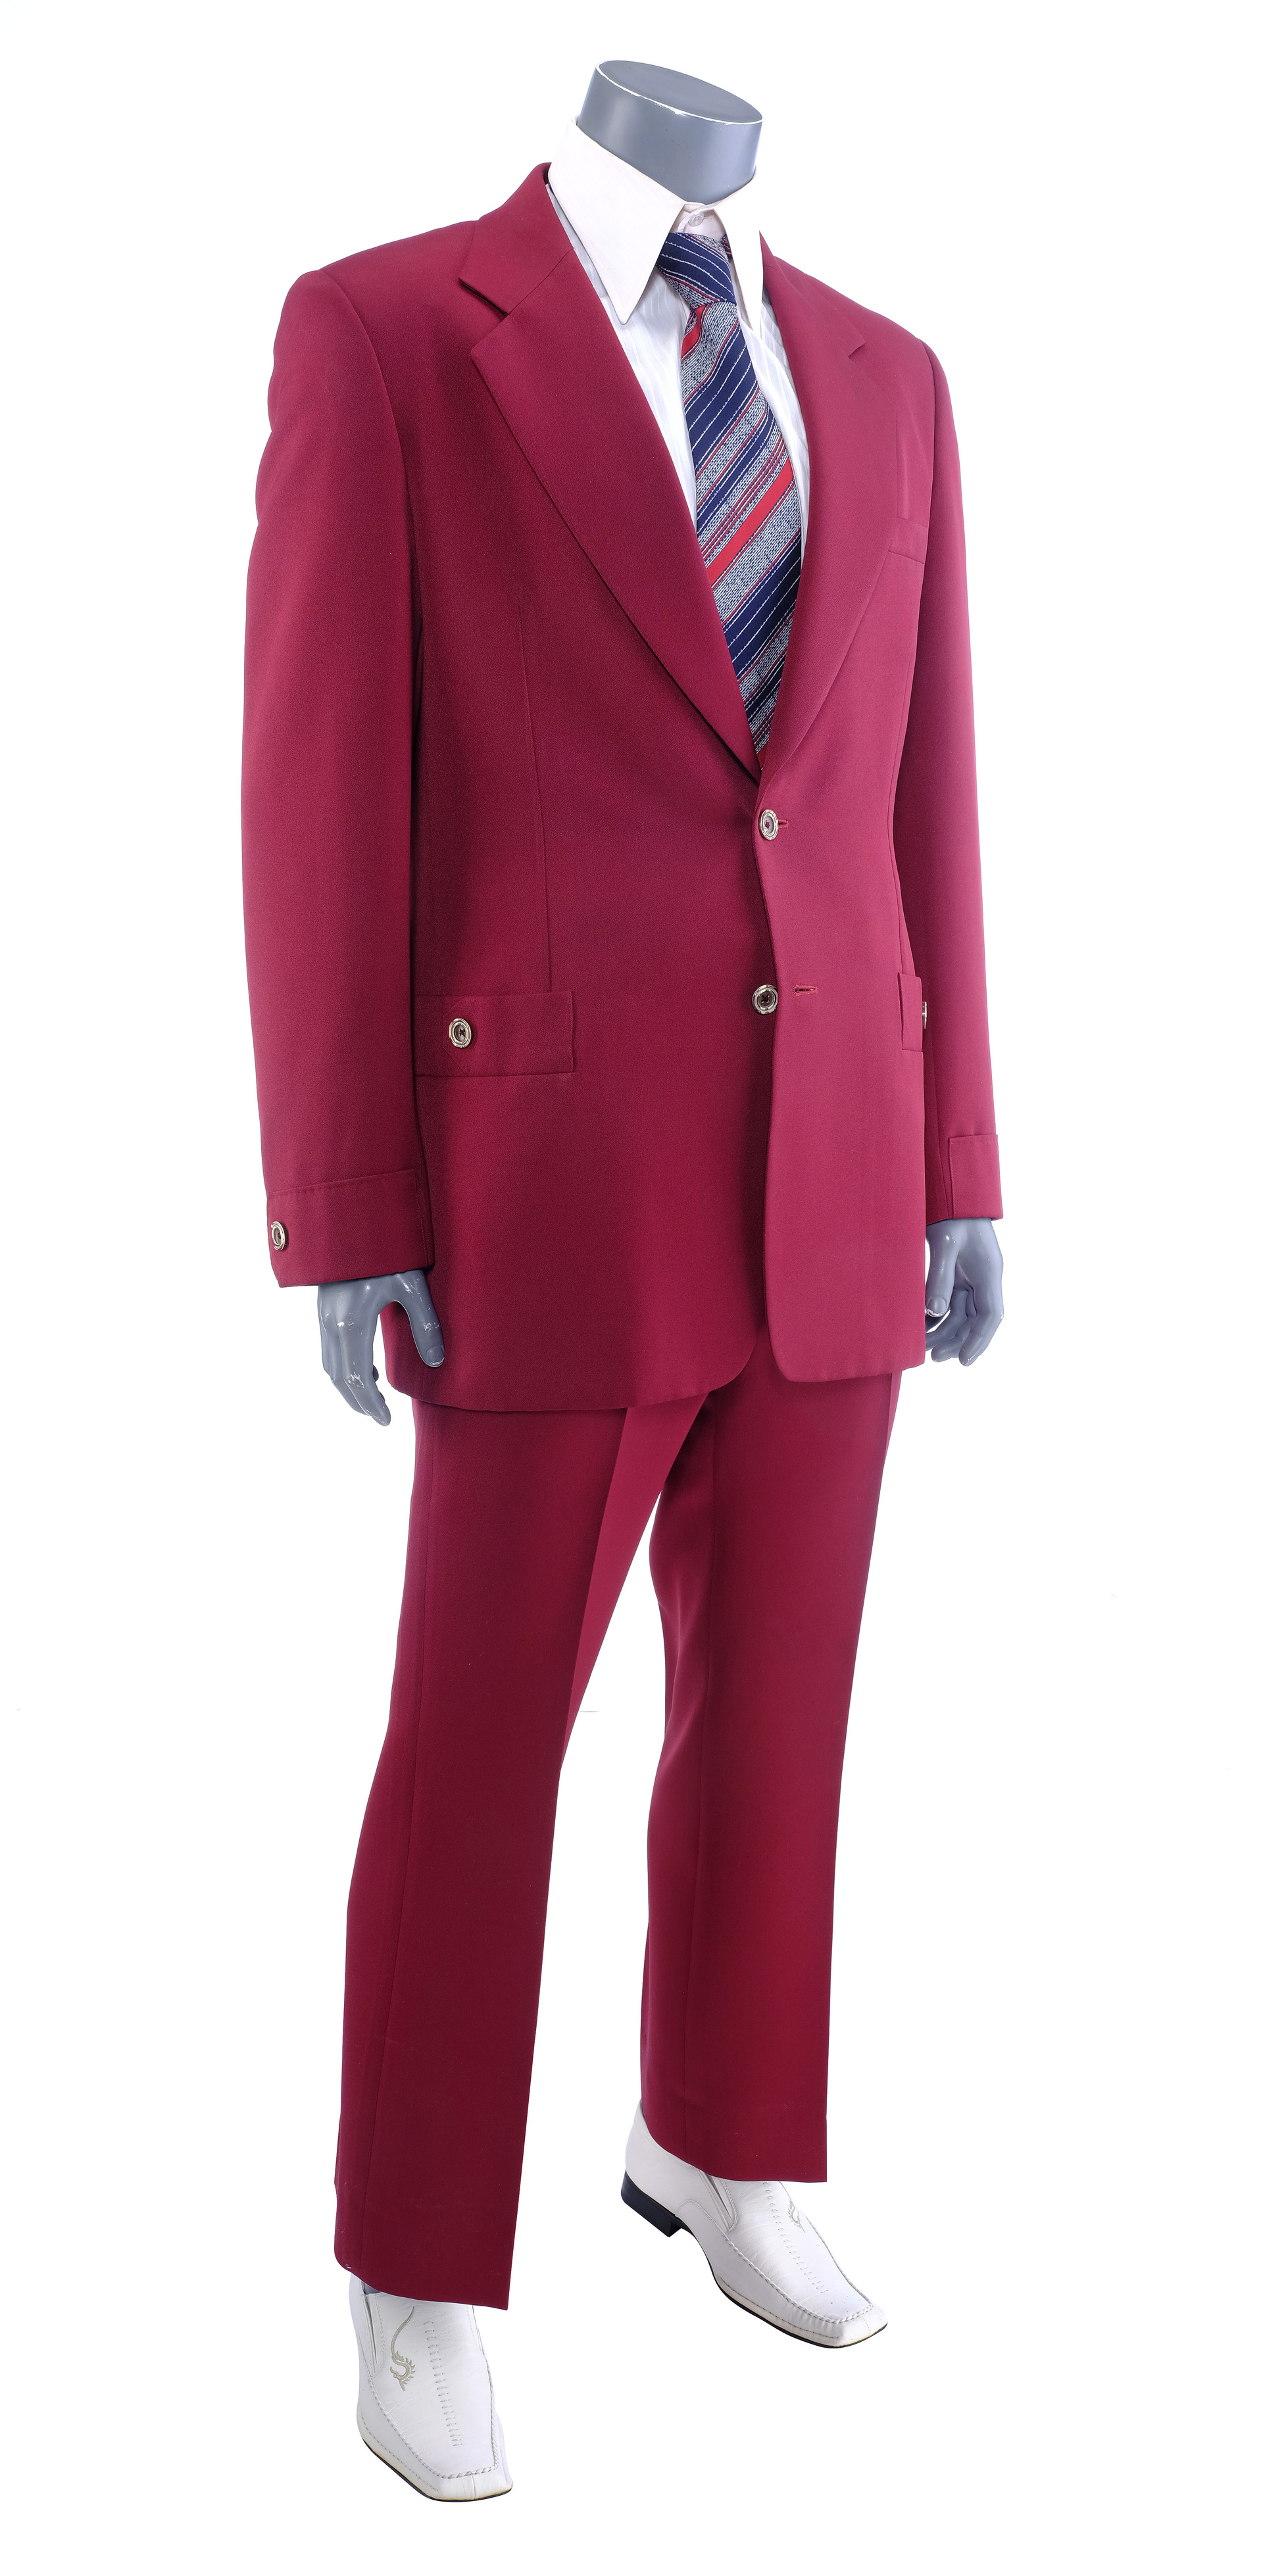 ANCHORMAN: THE LEGEND OF RON BURGUNDY - Ron Burgundy's (Will Ferrell) Suit - Image 2 of 5